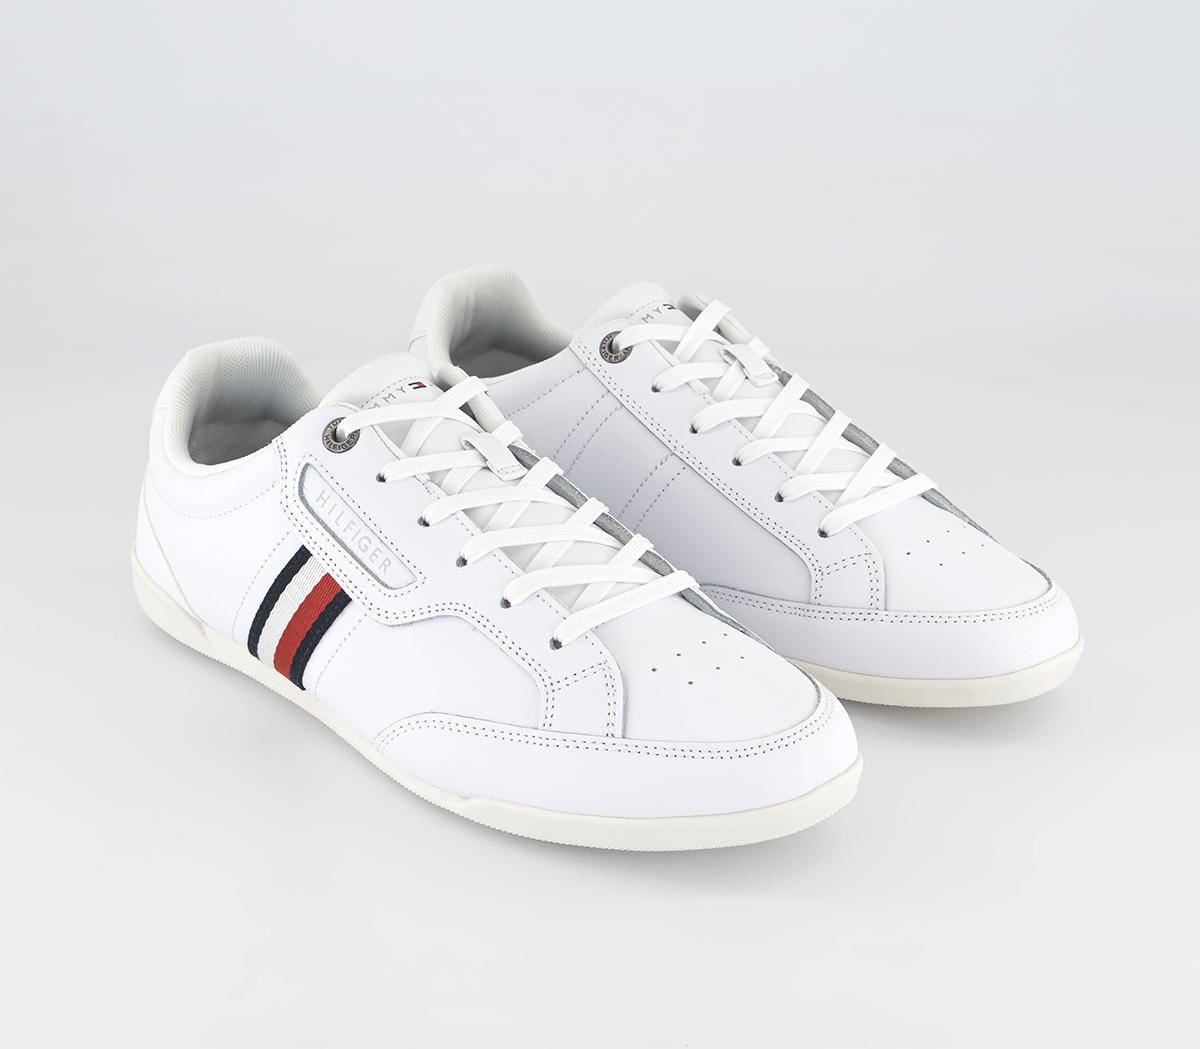 Tommy Hilfiger Classic Lo Cupsole Leather Trainers White Navy Red Stripe, 6.5